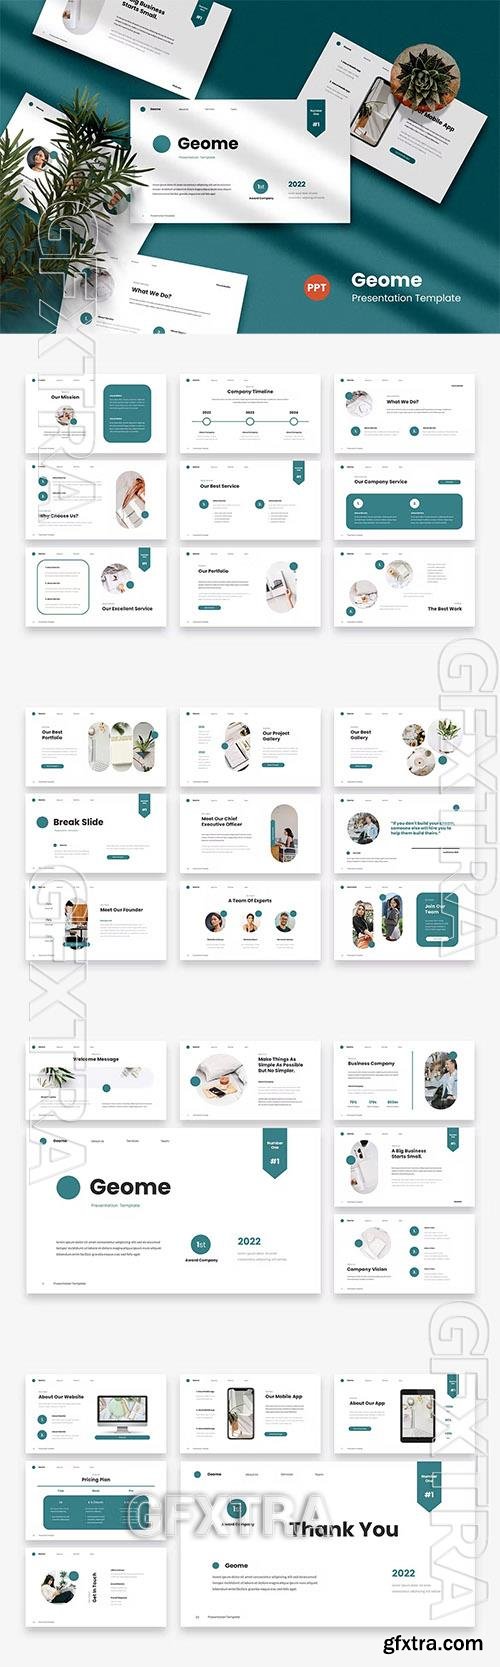 Geome - PowerPoint Template 77H5WPQ